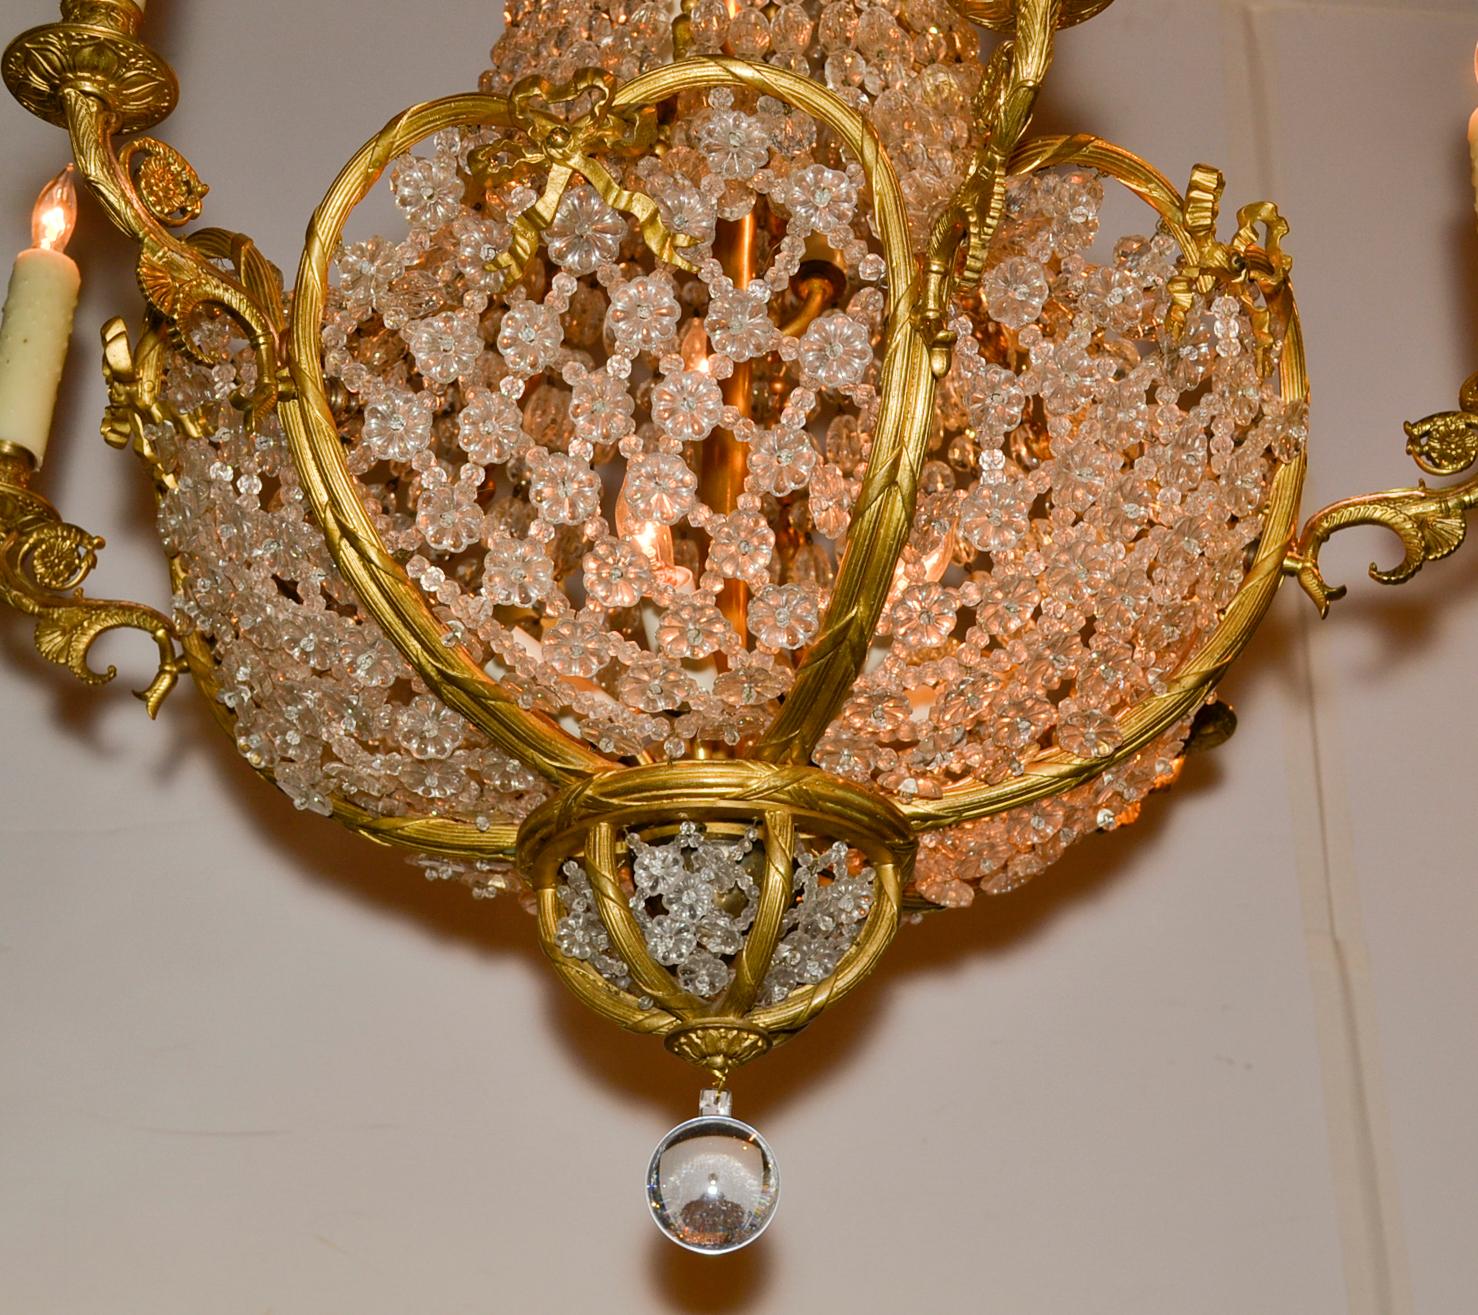 Great 19th century French 15-light gilt bronze and beaded crystal chandelier.